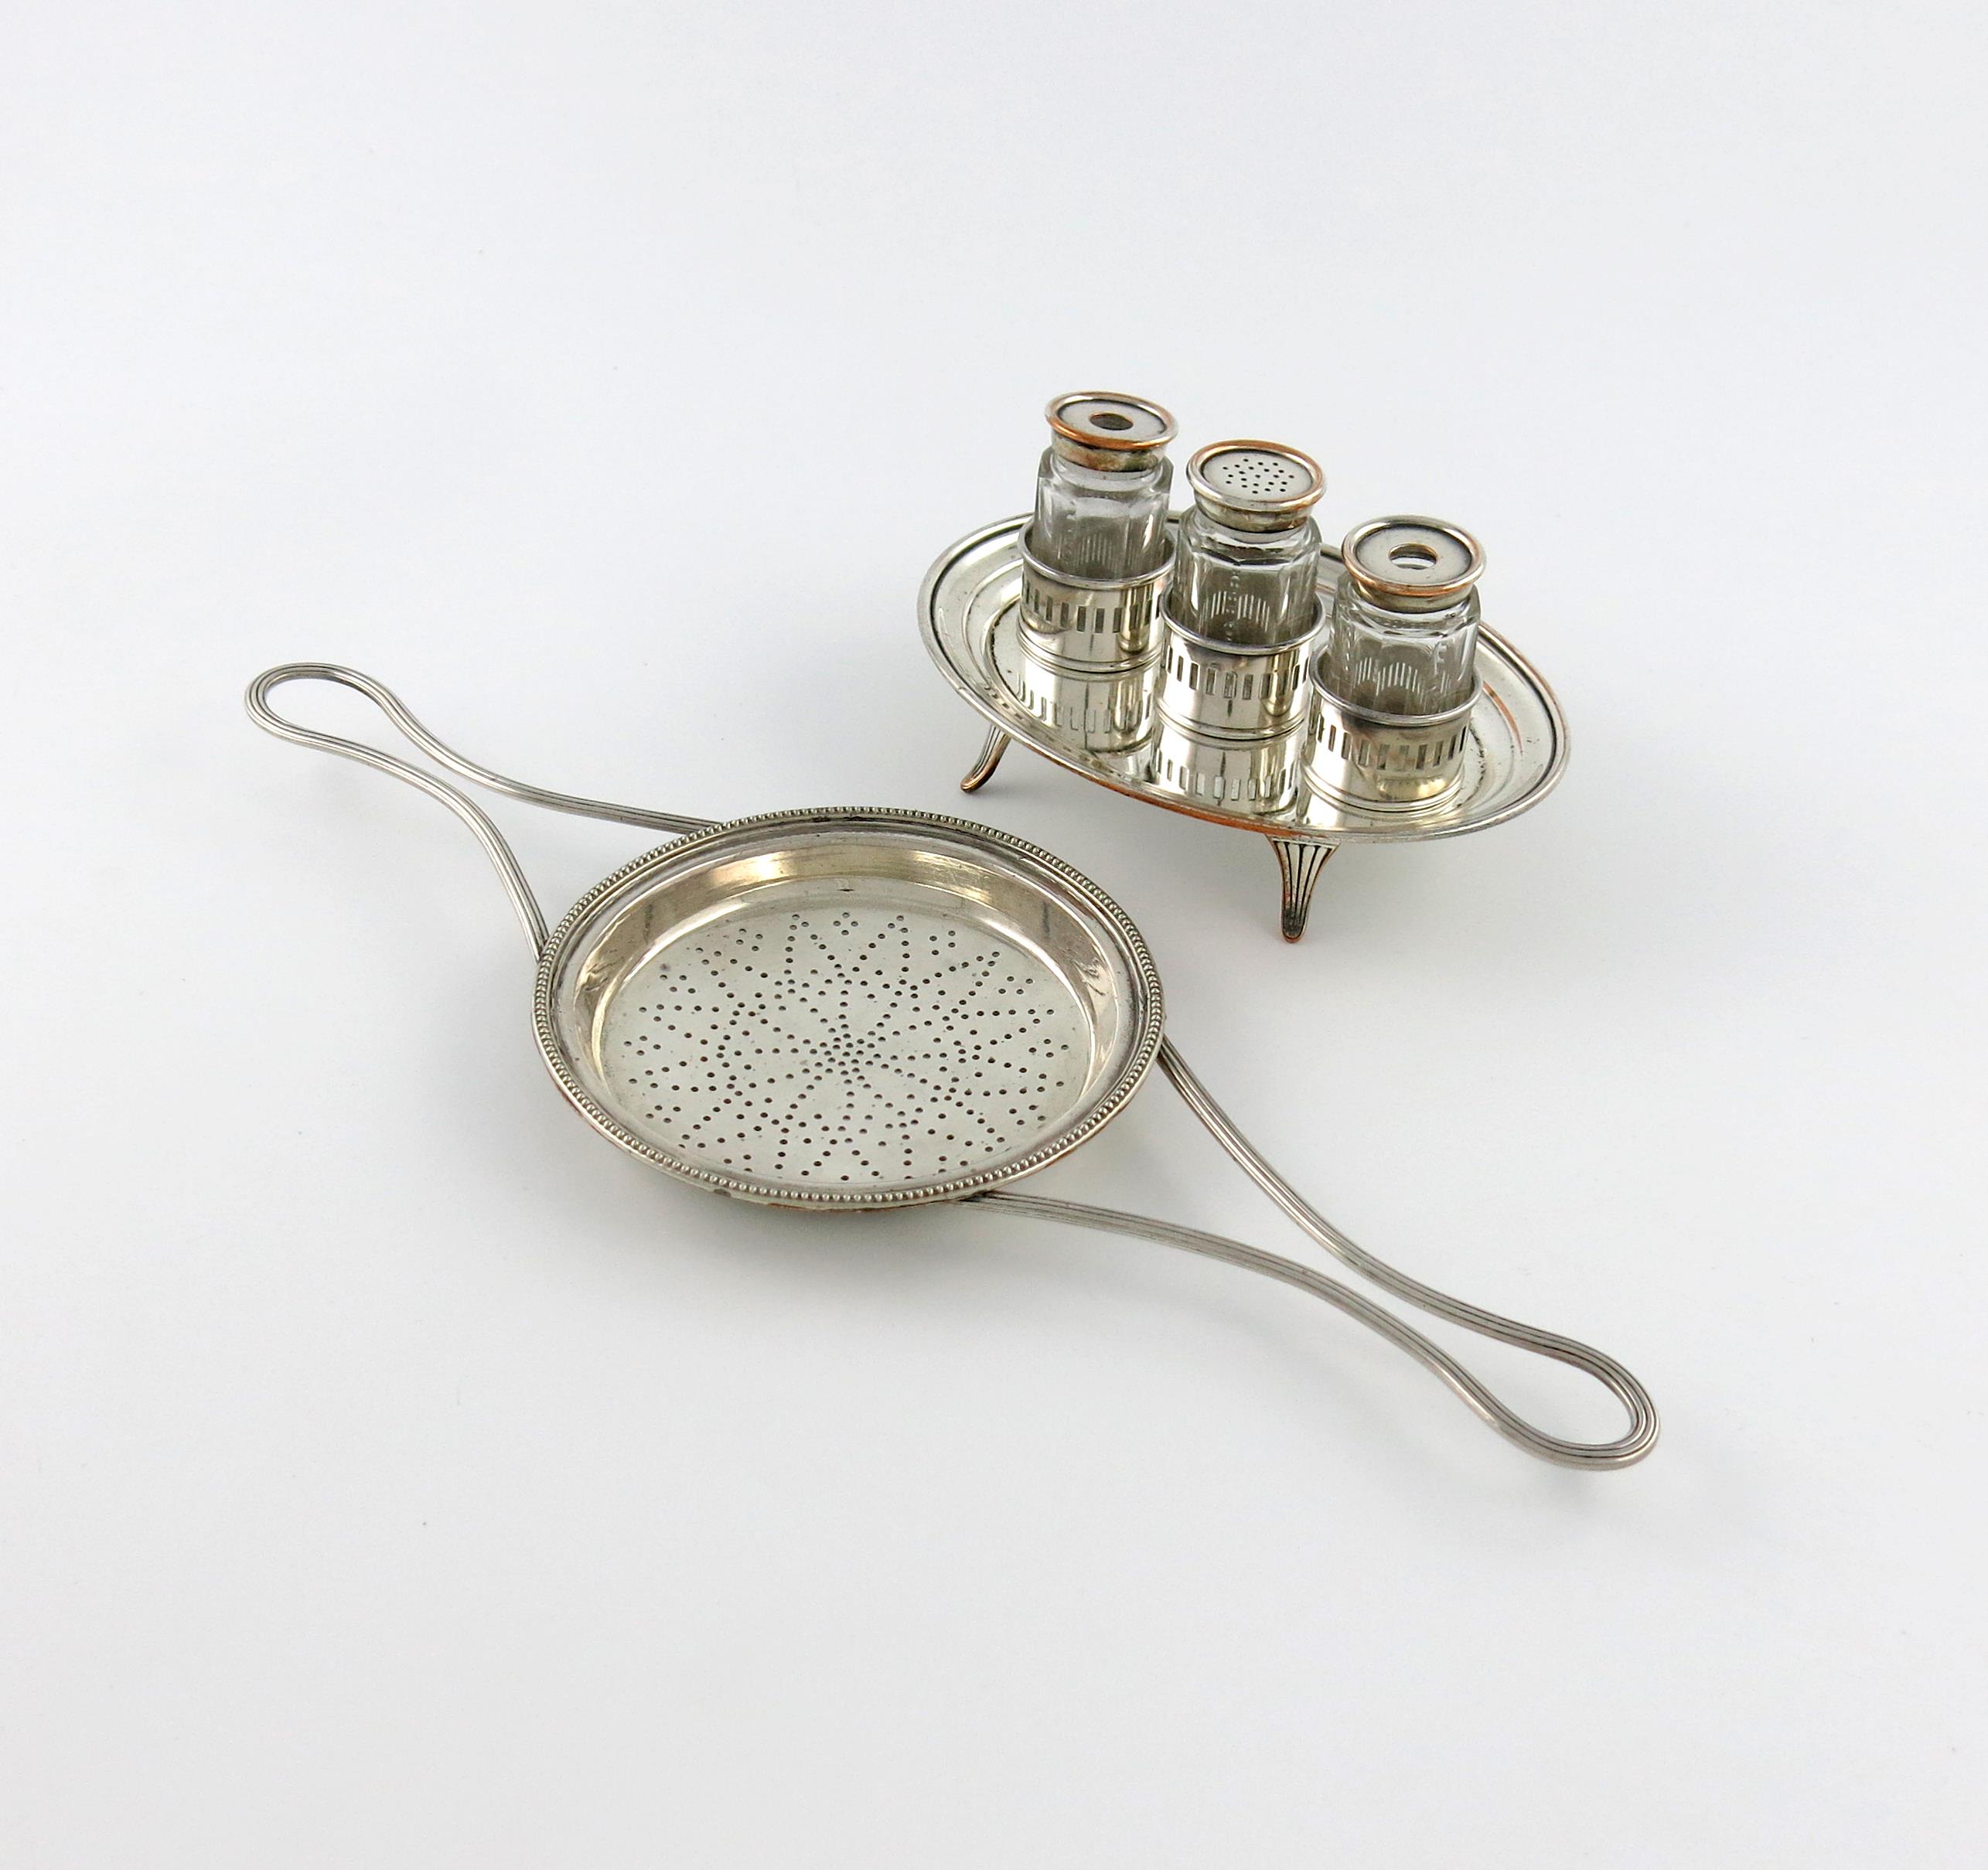 A George III old Sheffield plated two-handled lemon strainer, circa 1780-90, the shallow circular